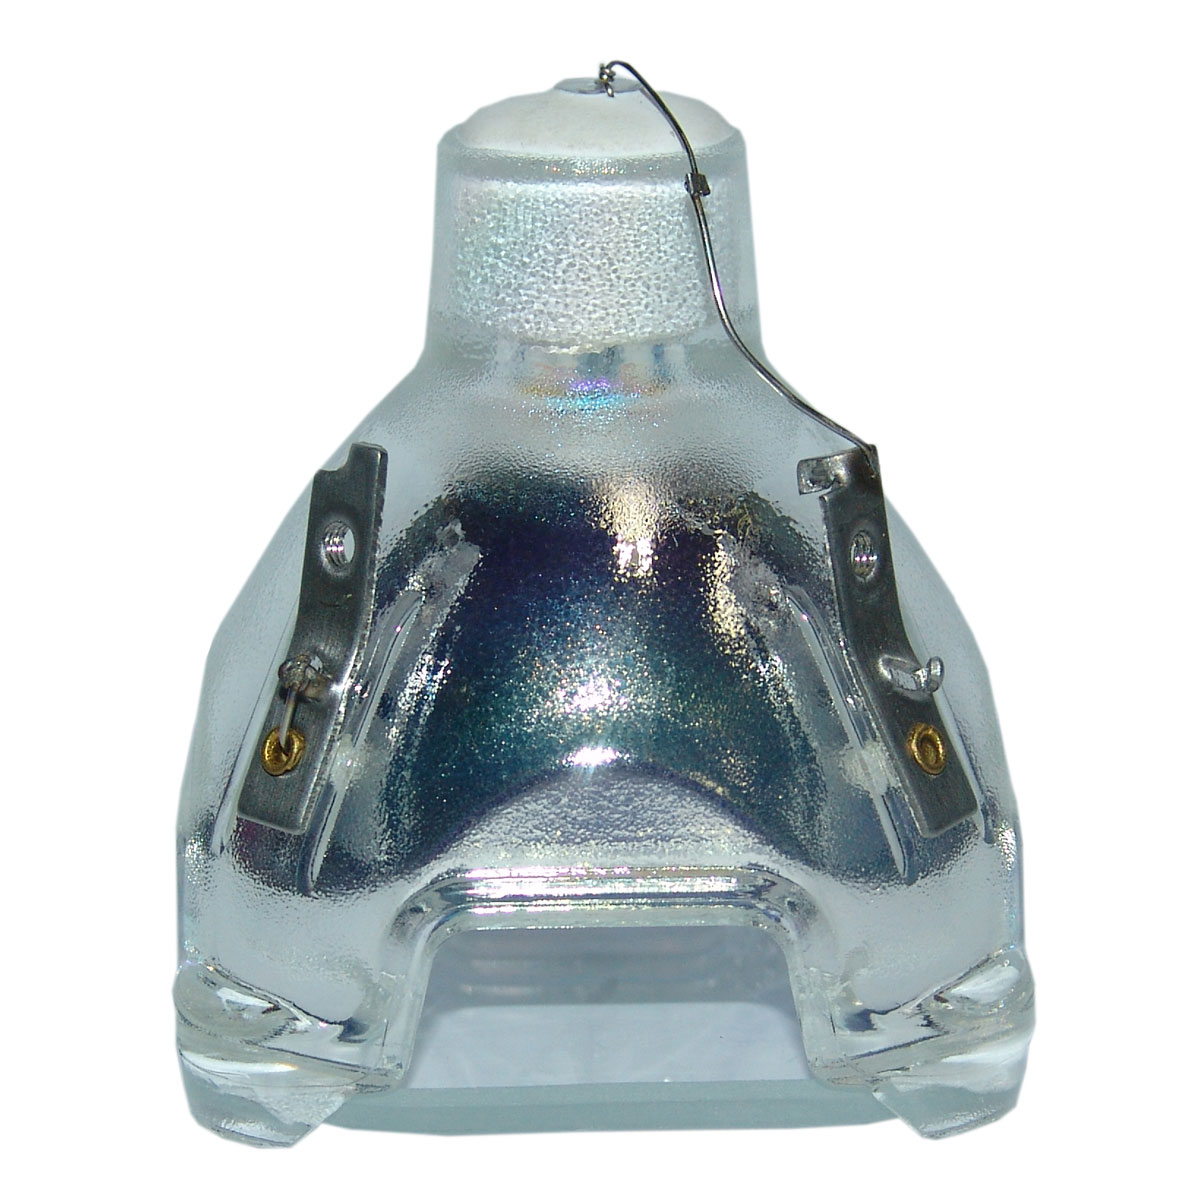 Lutema Economy Bulb for Eiki 610-300-7267 Projector (Lamp Only) - image 4 of 6